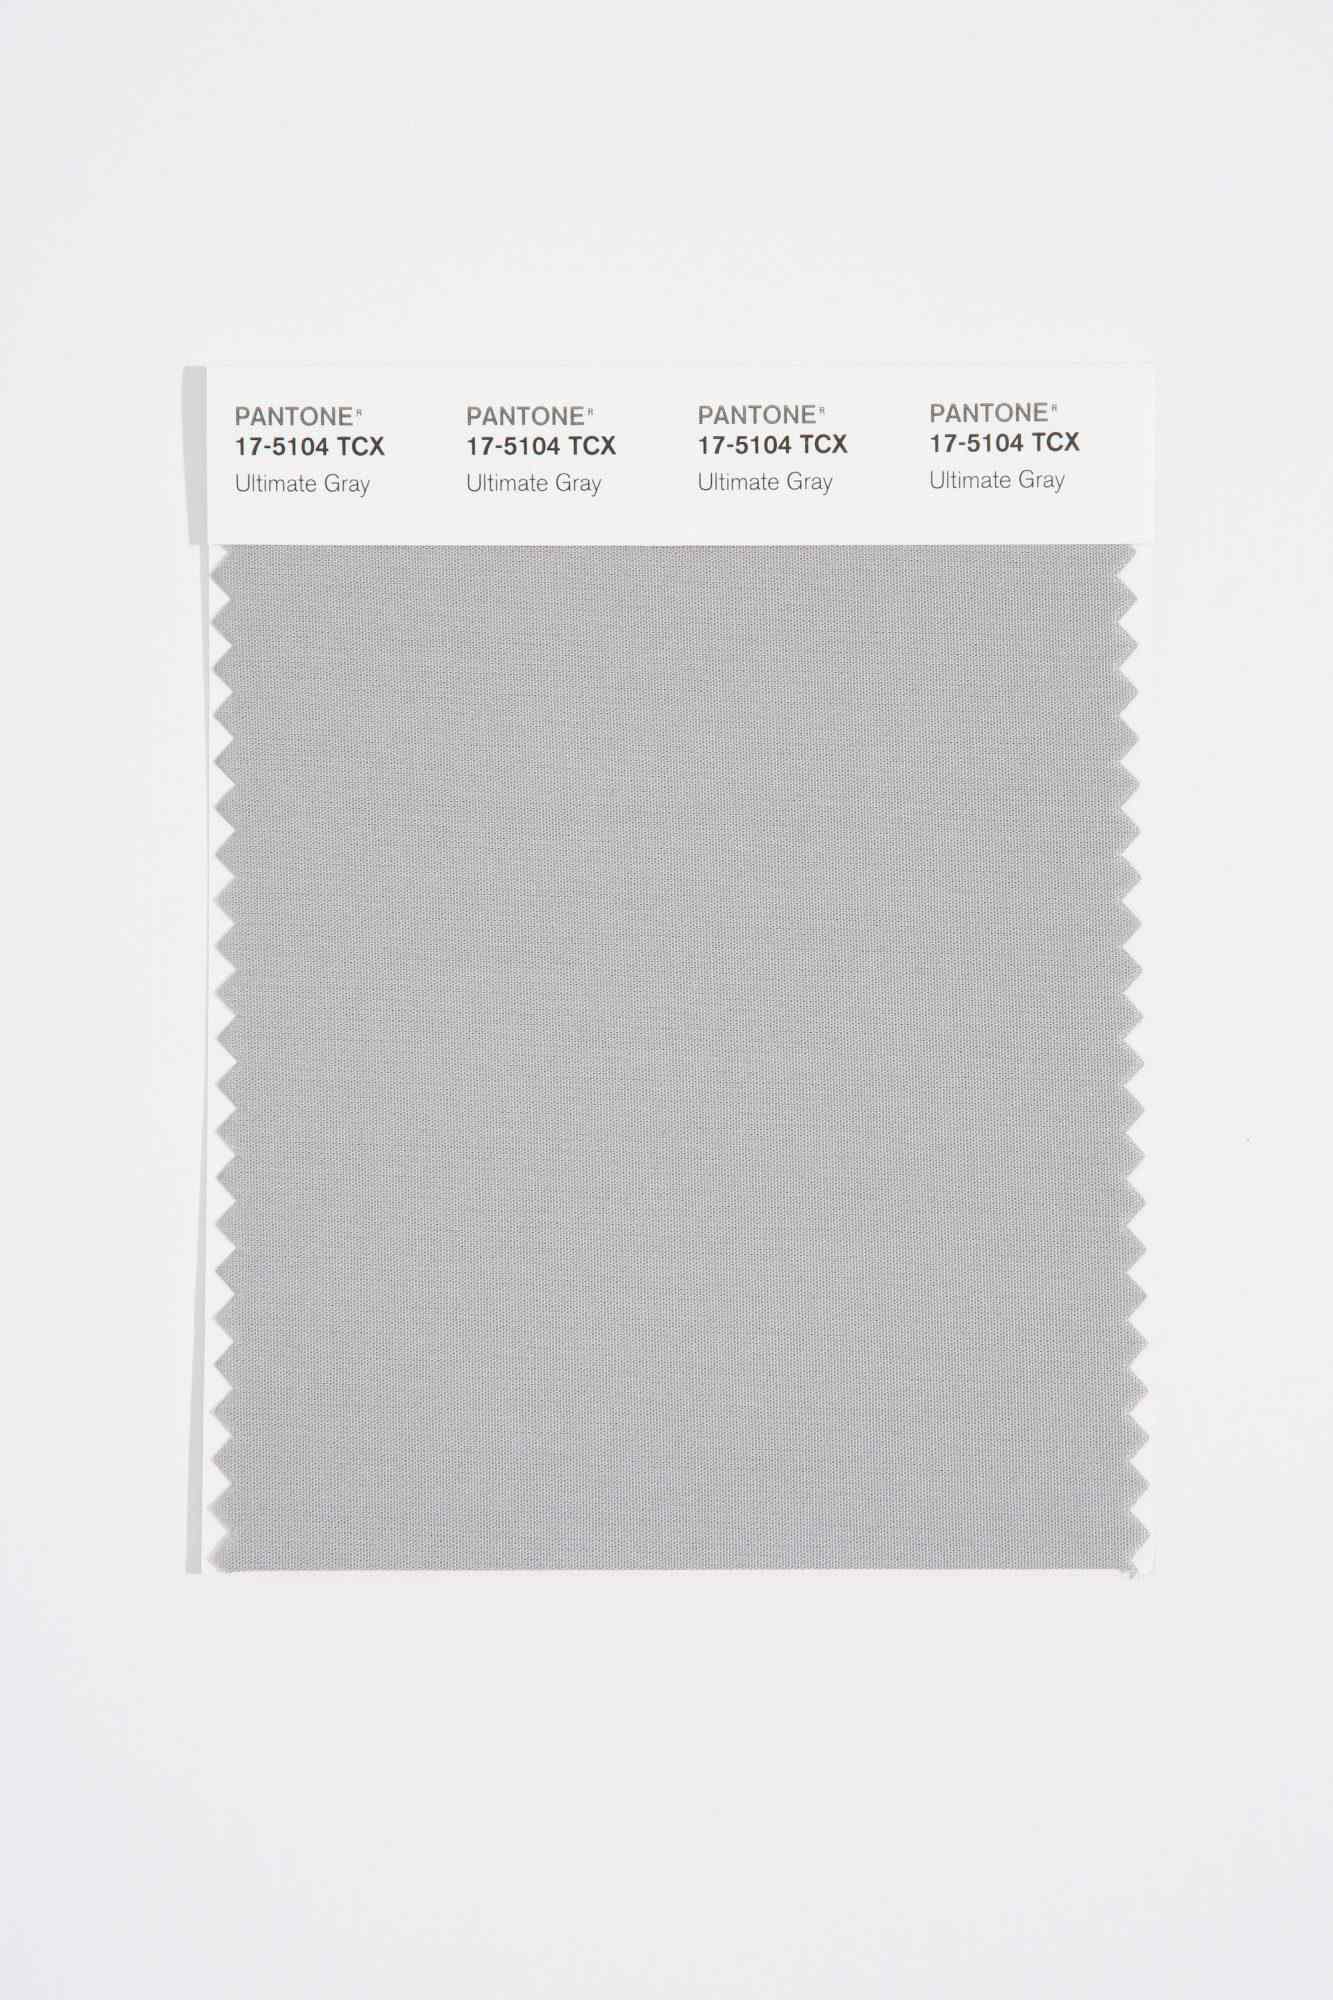 Pantone Color of the Year 2021, Ultimate Gray